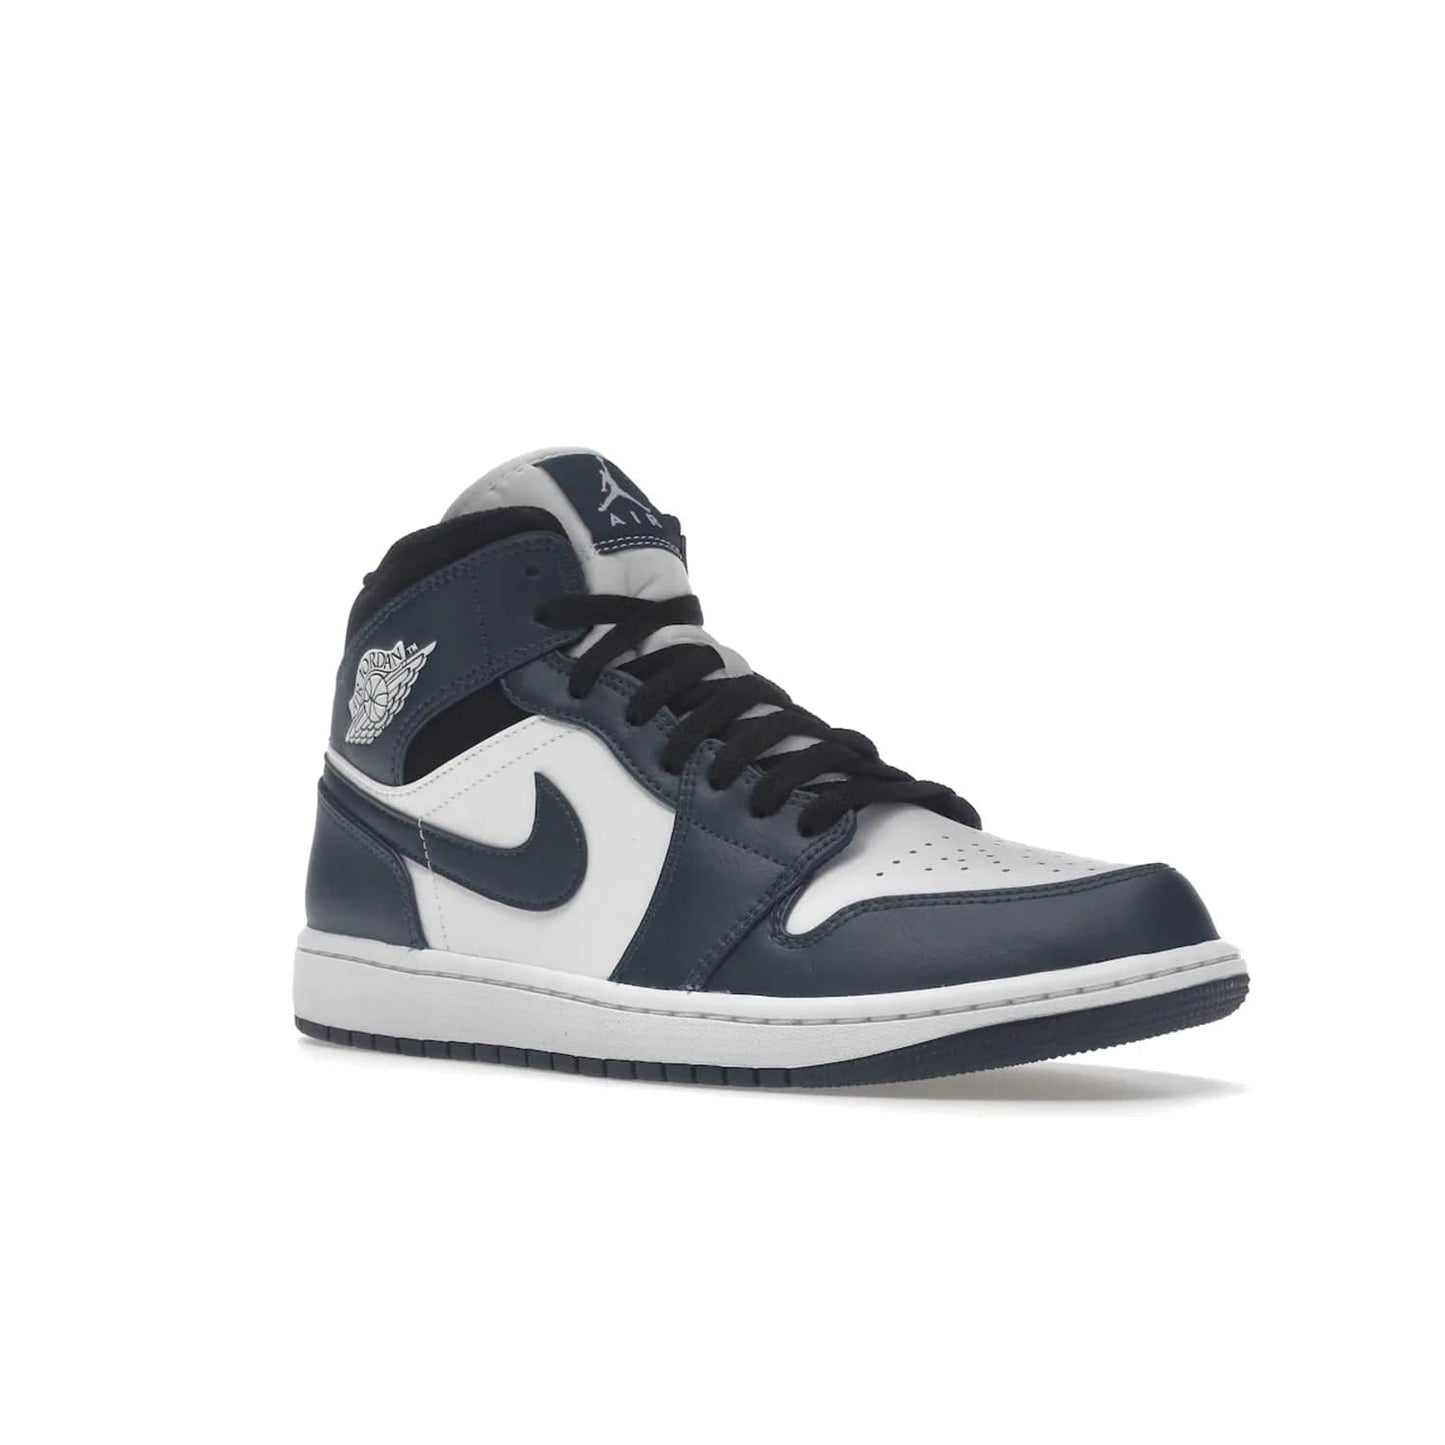 Jordan 1 Mid Armory Navy - Image 5 - Only at www.BallersClubKickz.com - The Jordan 1 Mid Armory Navy: classic basketball sneaker with soft white leather upper, deep navy blue overlays, and black leather ankle detailing. Iconic style with Jordan Wings logo and Jumpman label.